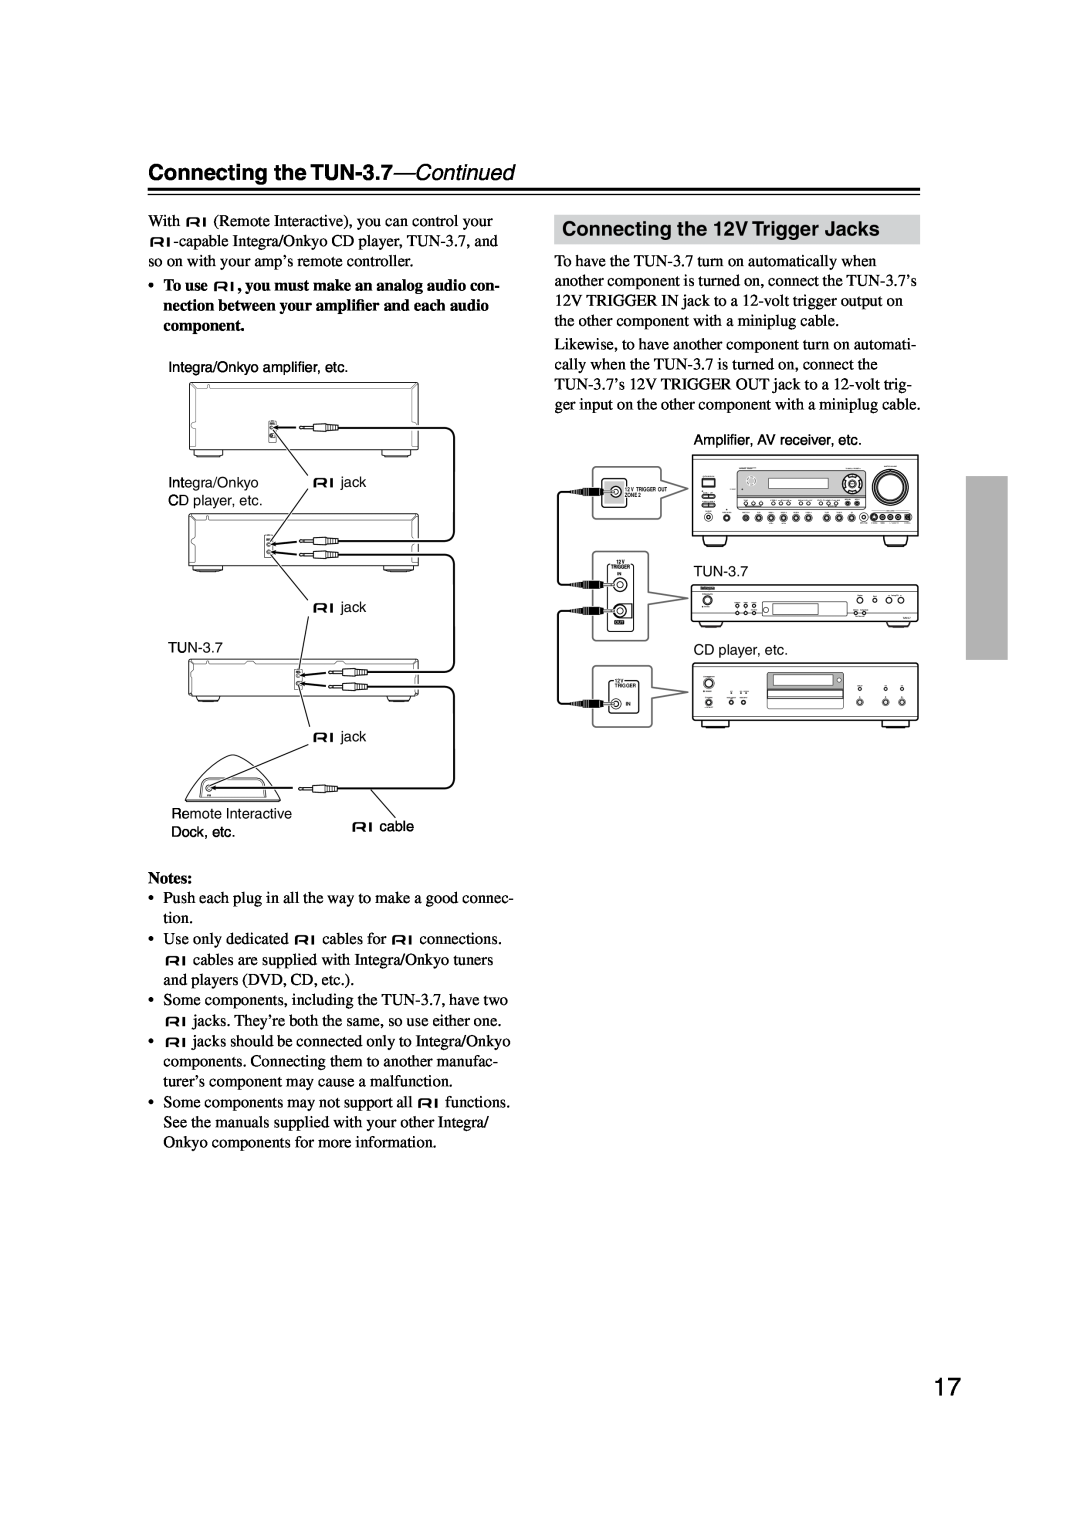 Integra instruction manual Connecting the TUN-3.7-Continued, Connecting the 12V Trigger Jacks 